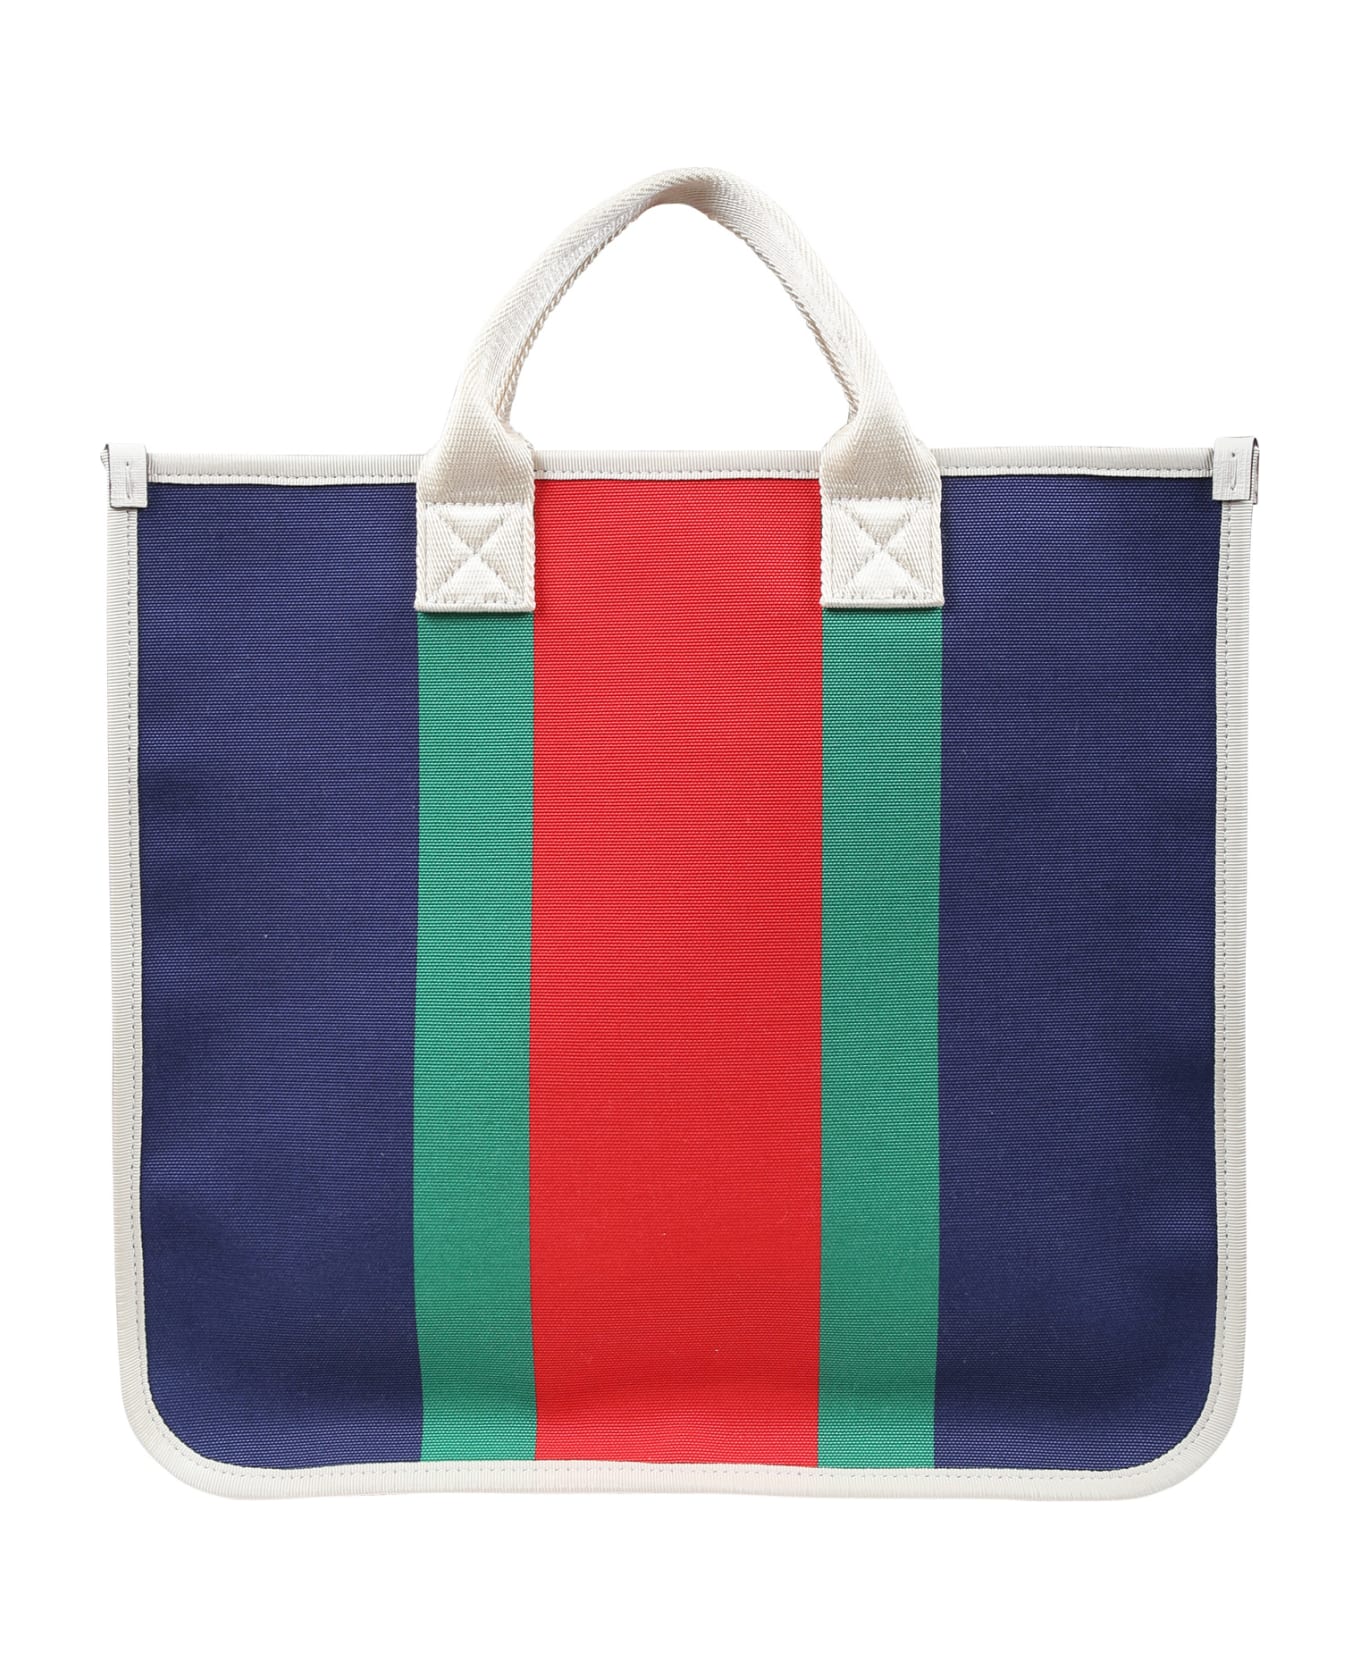 Gucci Casual Multicolor Bag For Kids With Print - Multicolor